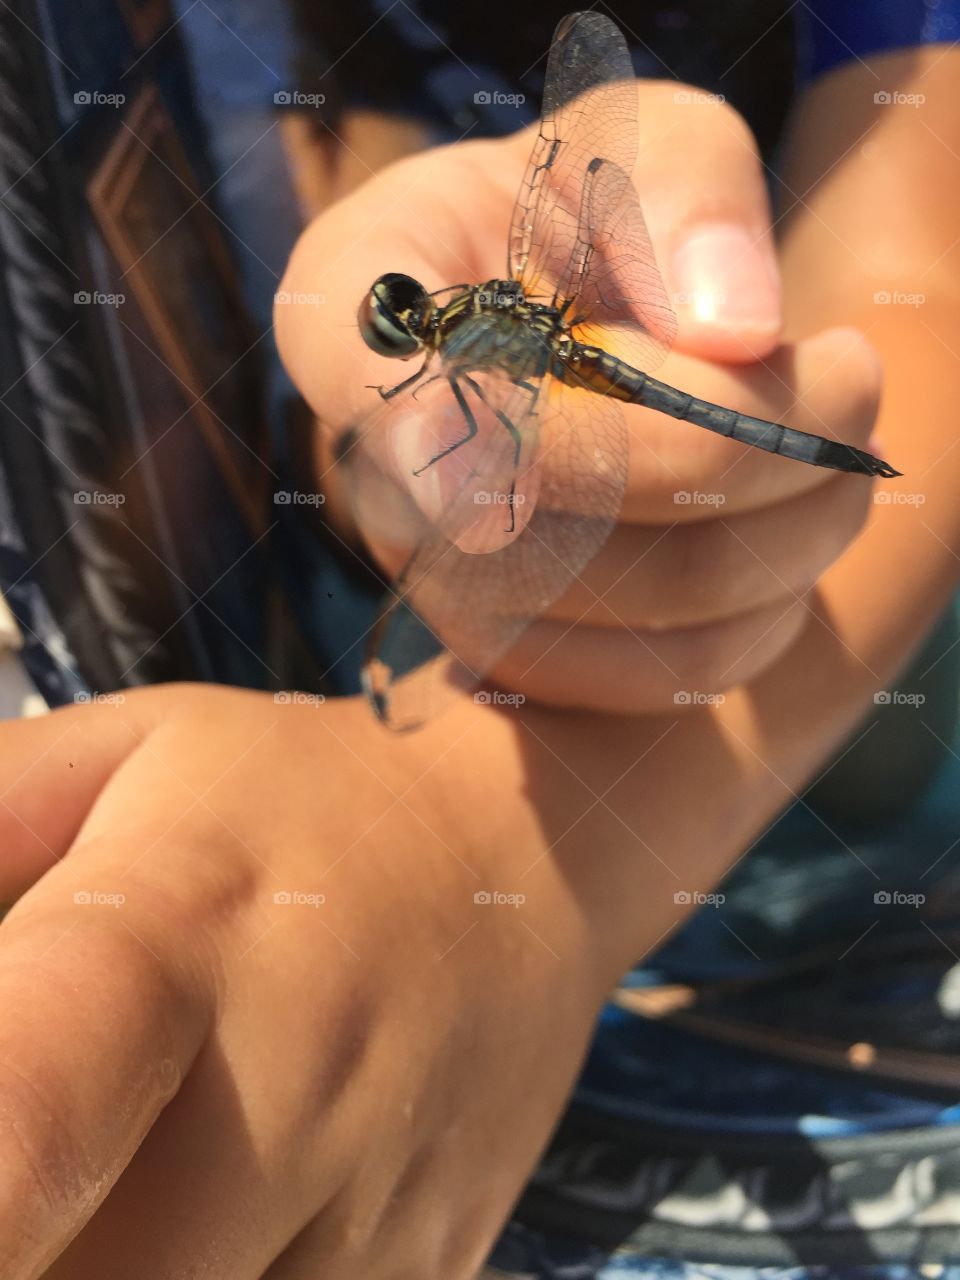 Dragonfly rescue